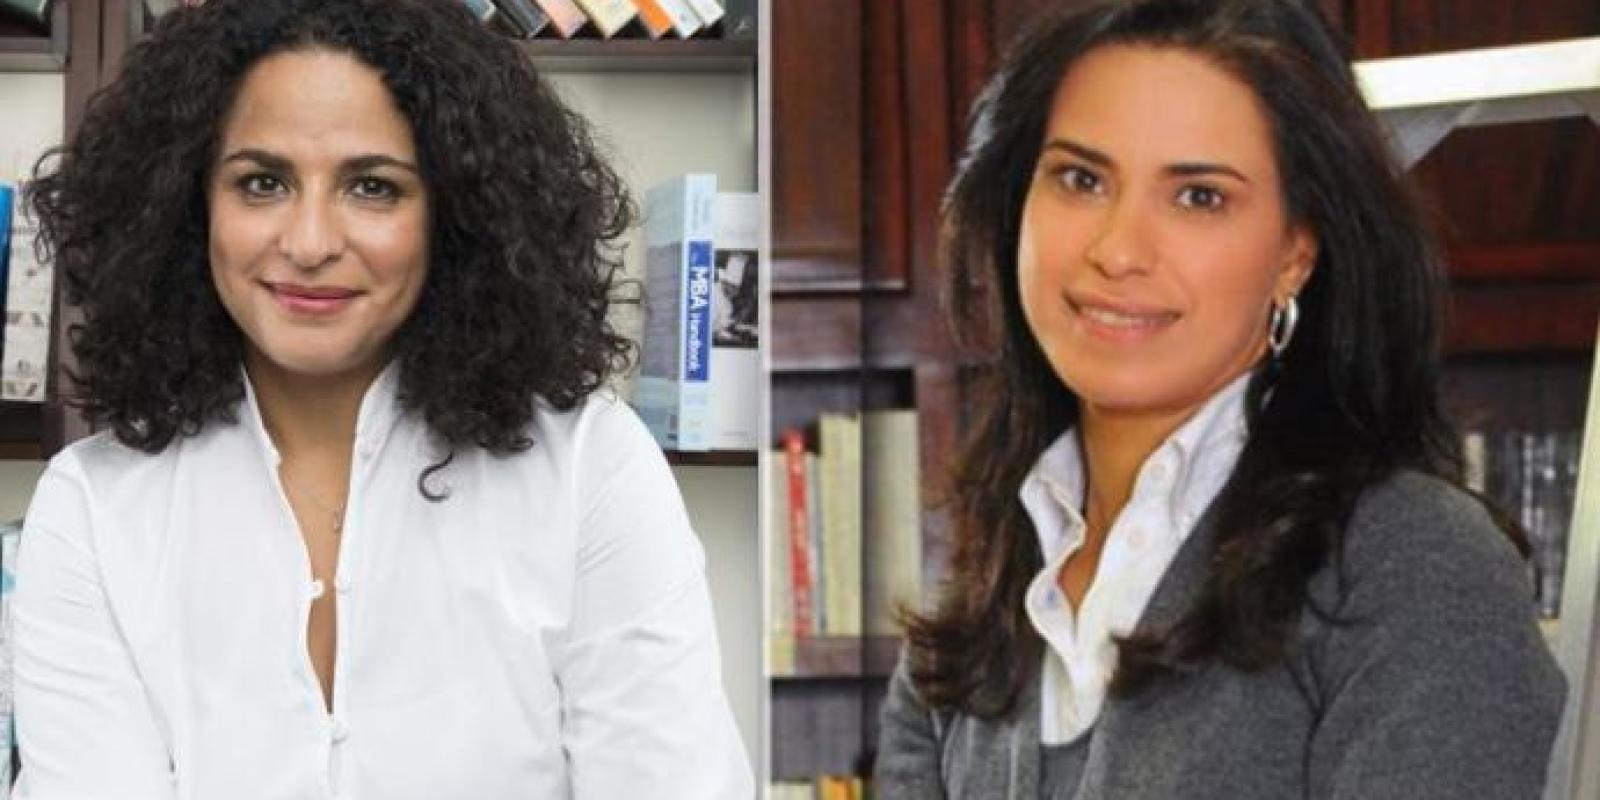 Alumnae Nadia and Hind Wassef, founders of Diwan Bookstore, discuss the state of publishing and literature in Egypt today